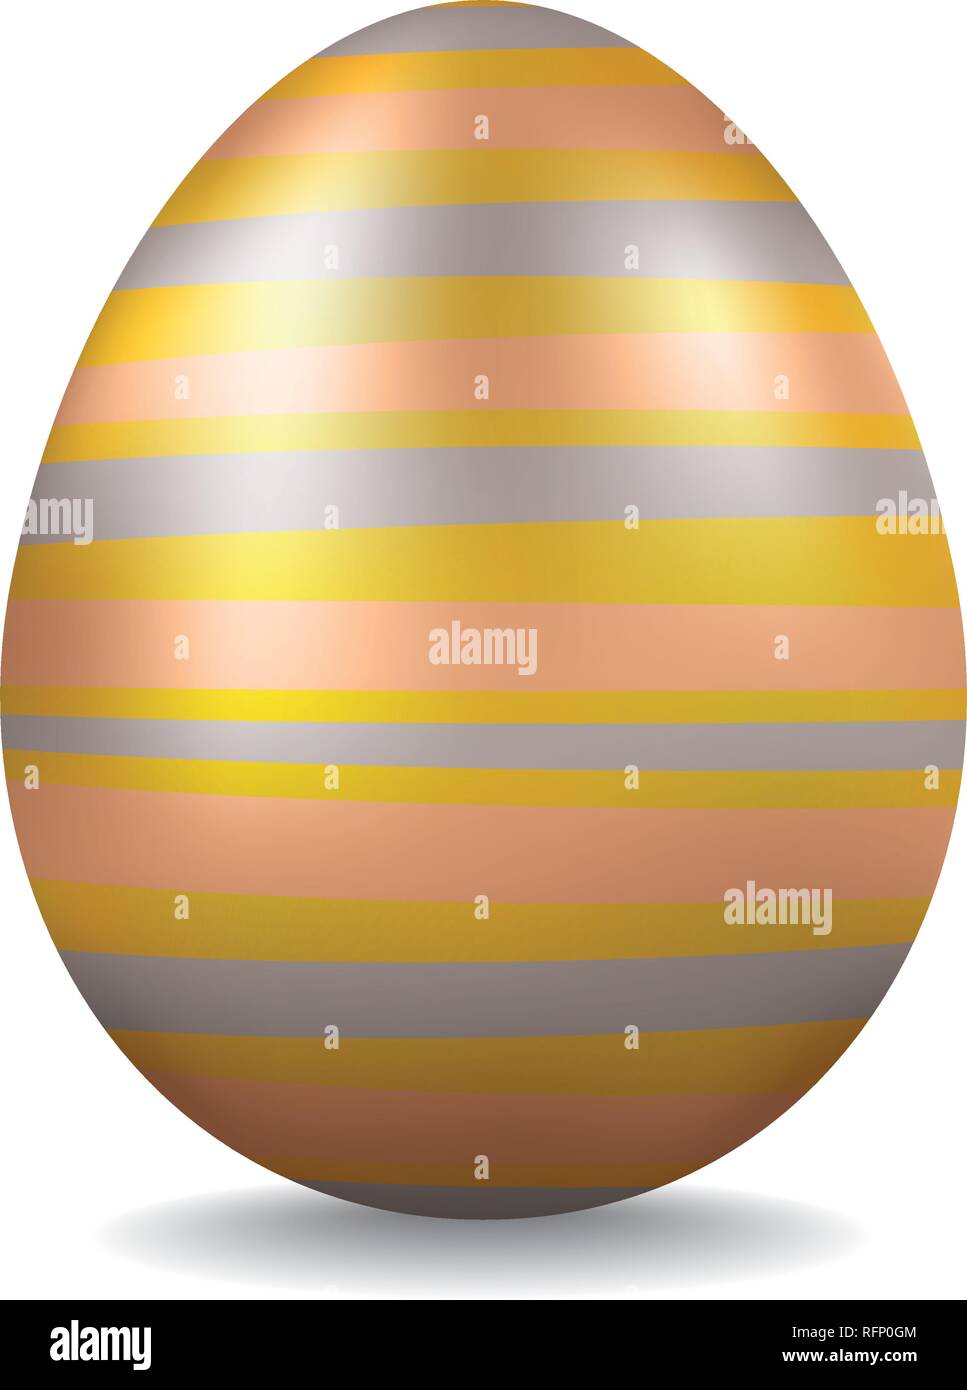 Golden Easter Egg with silver and bronze stripes pattern vector illustration Stock Vector